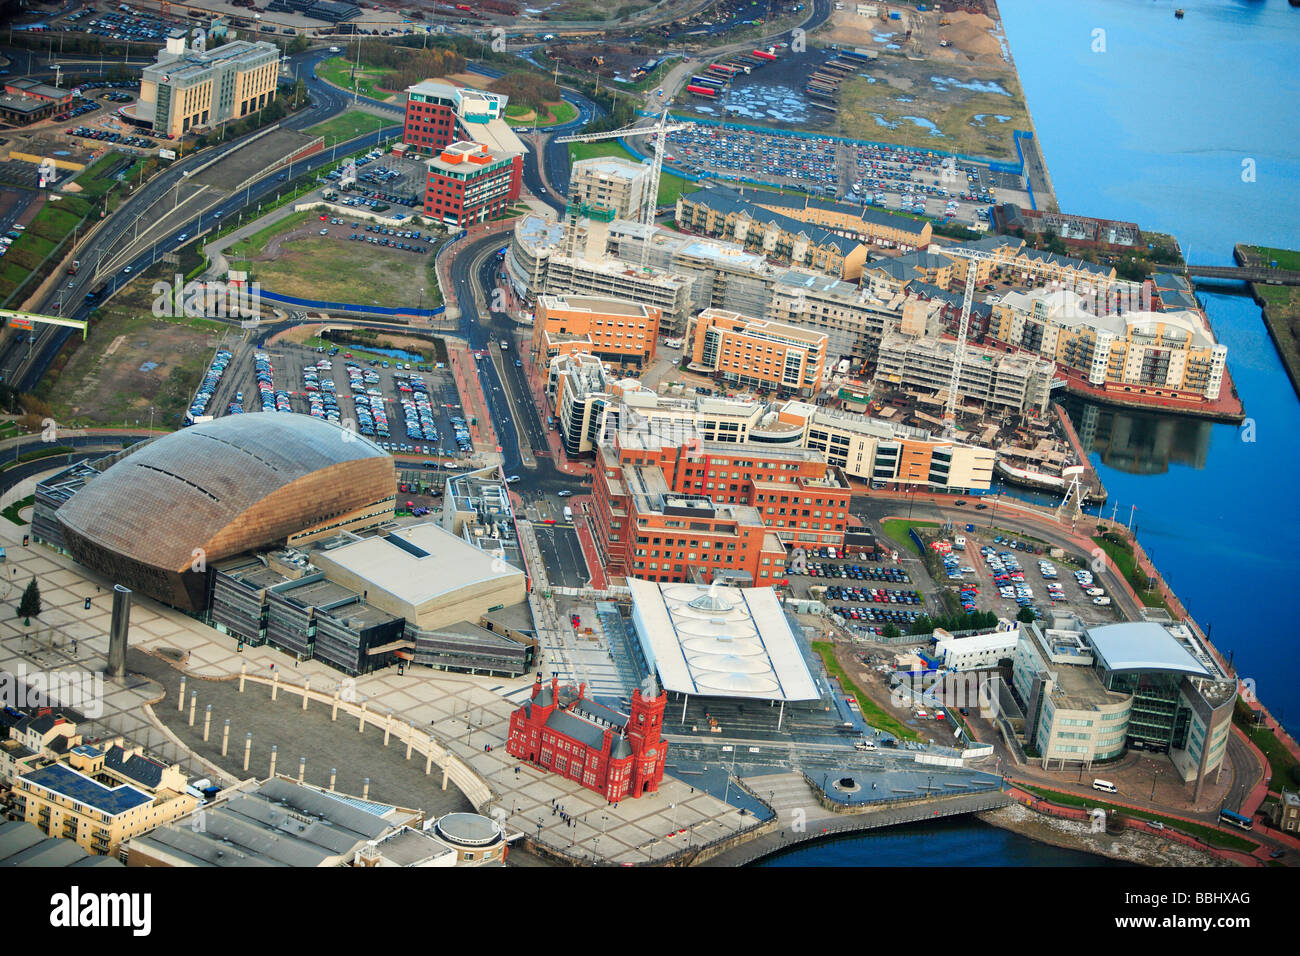 Cardiff Docks Aerial High Resolution Stock Photography and Images - Alamy